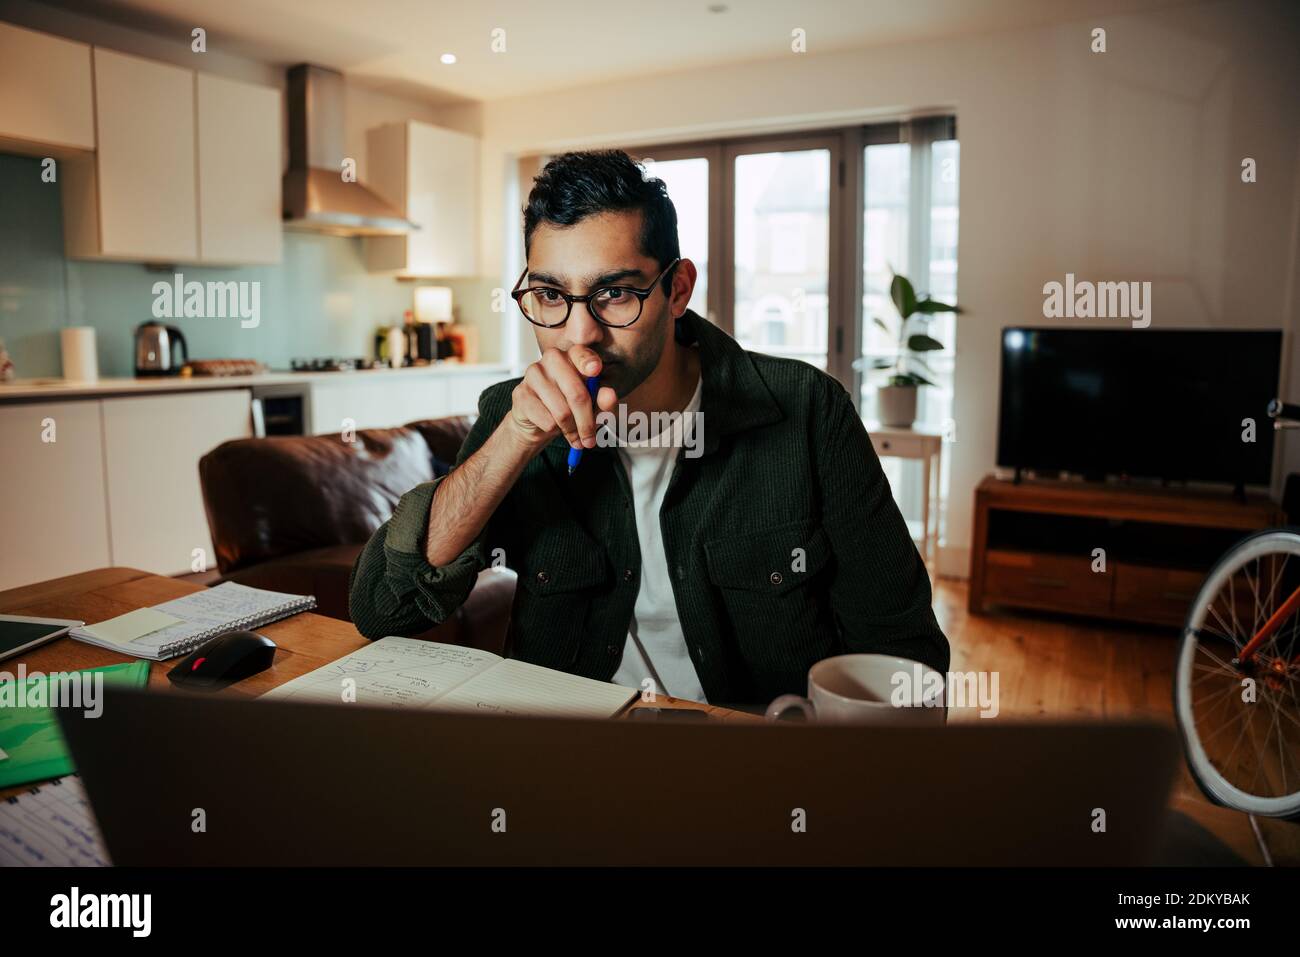 Mixed race business man wearing spectacles studying off desktop computer attending online meetings Stock Photo